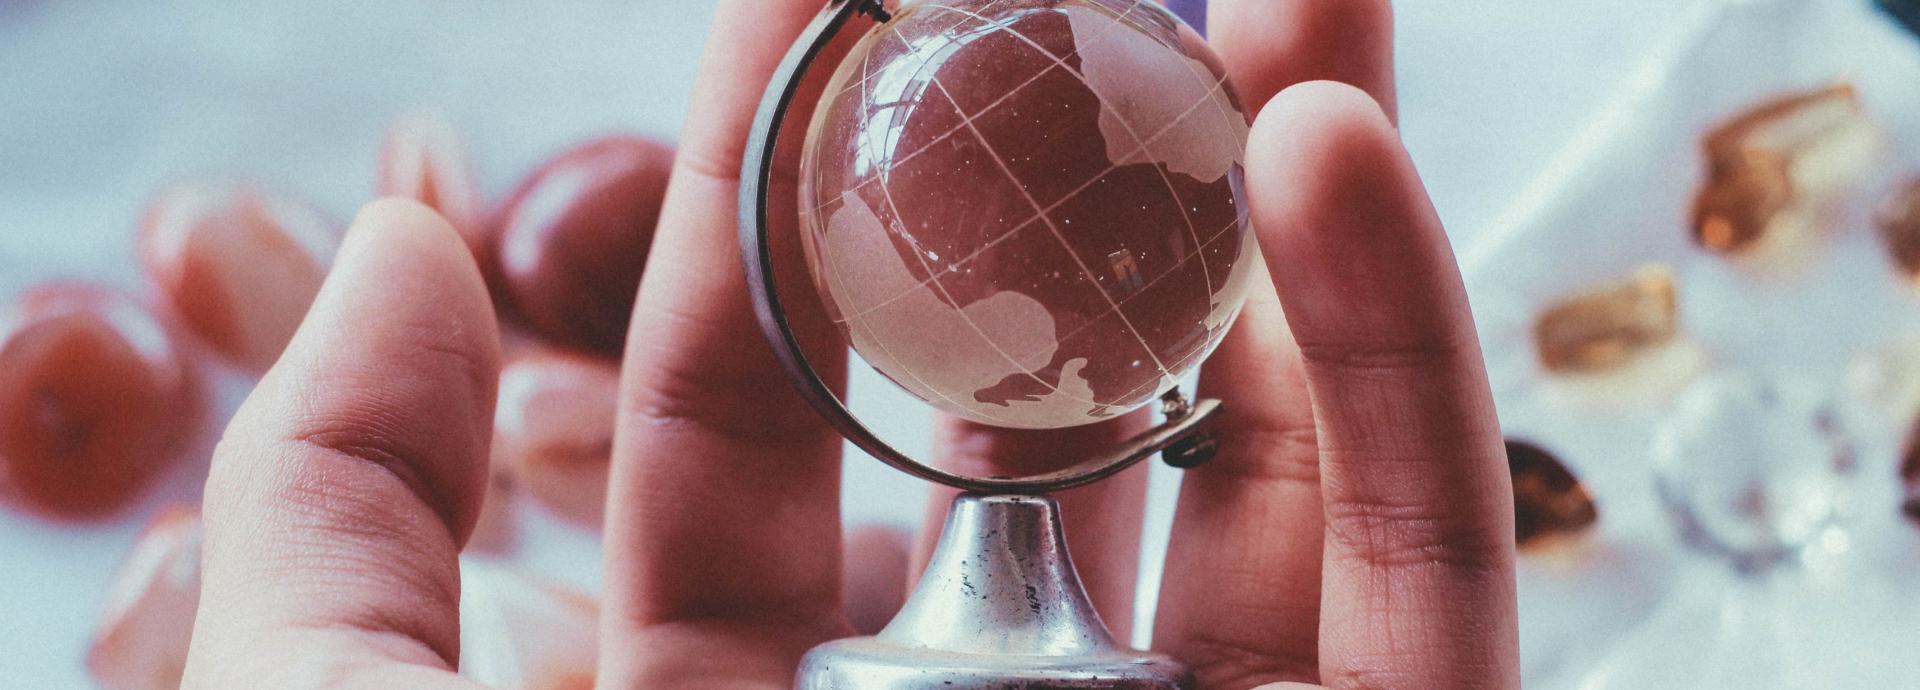 A person holding a globe made of glass in their hand.